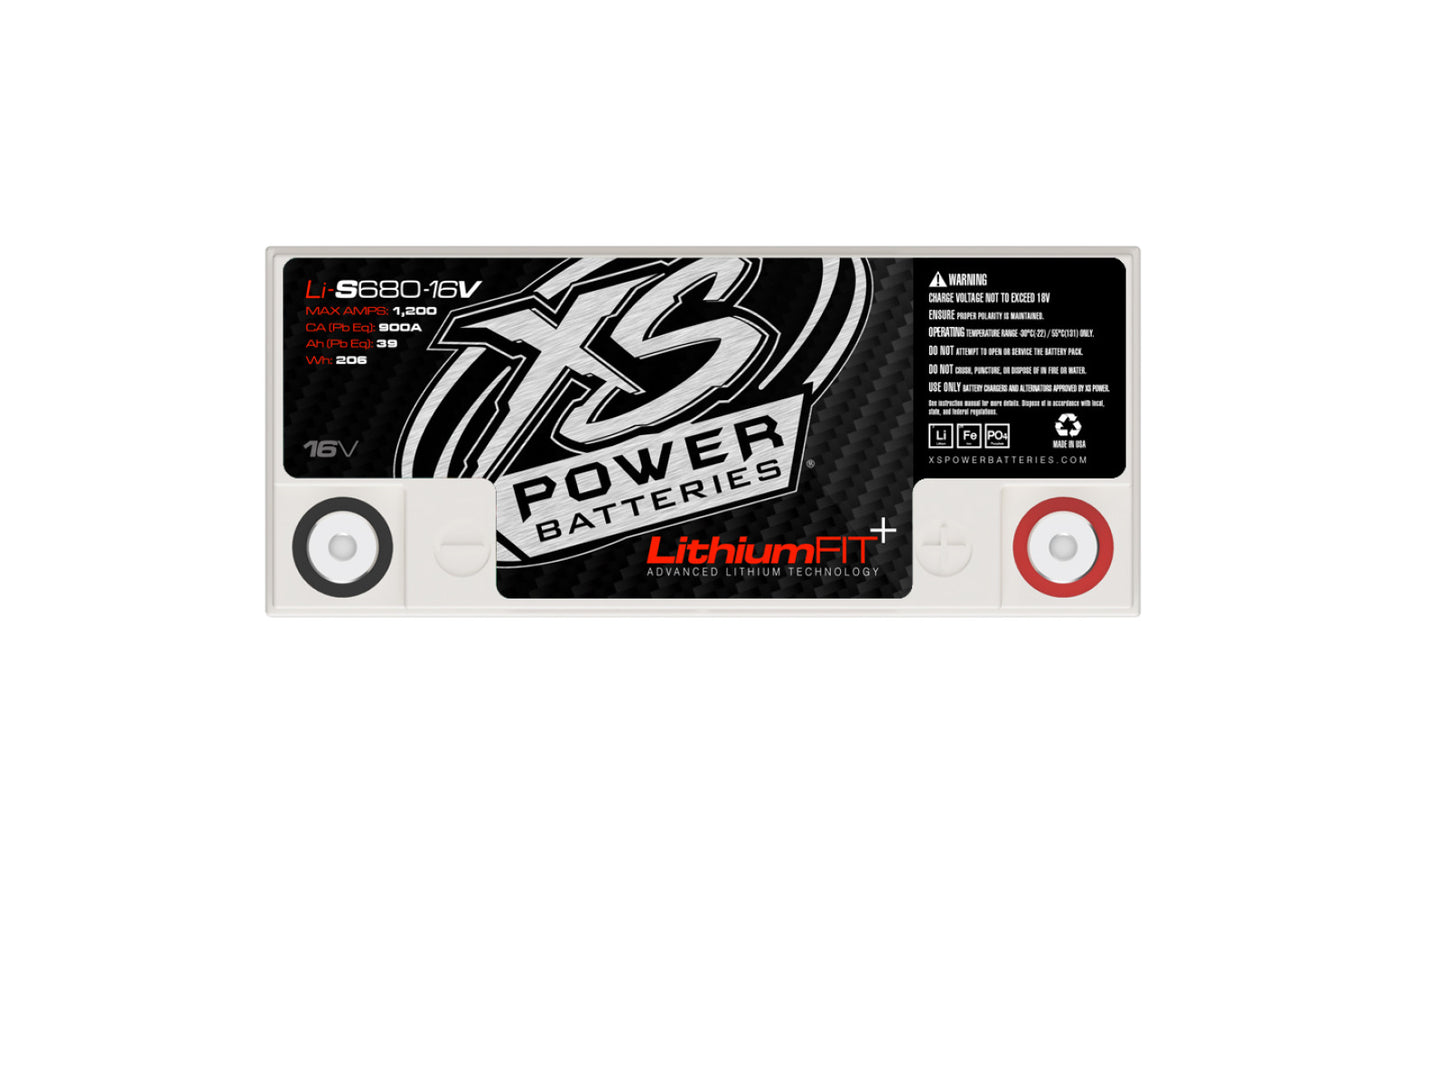 XS Power Batteries Lithium Racing 16V Batteries - Stud Adaptors/Terminal Bolts Included 1200 Max Amps